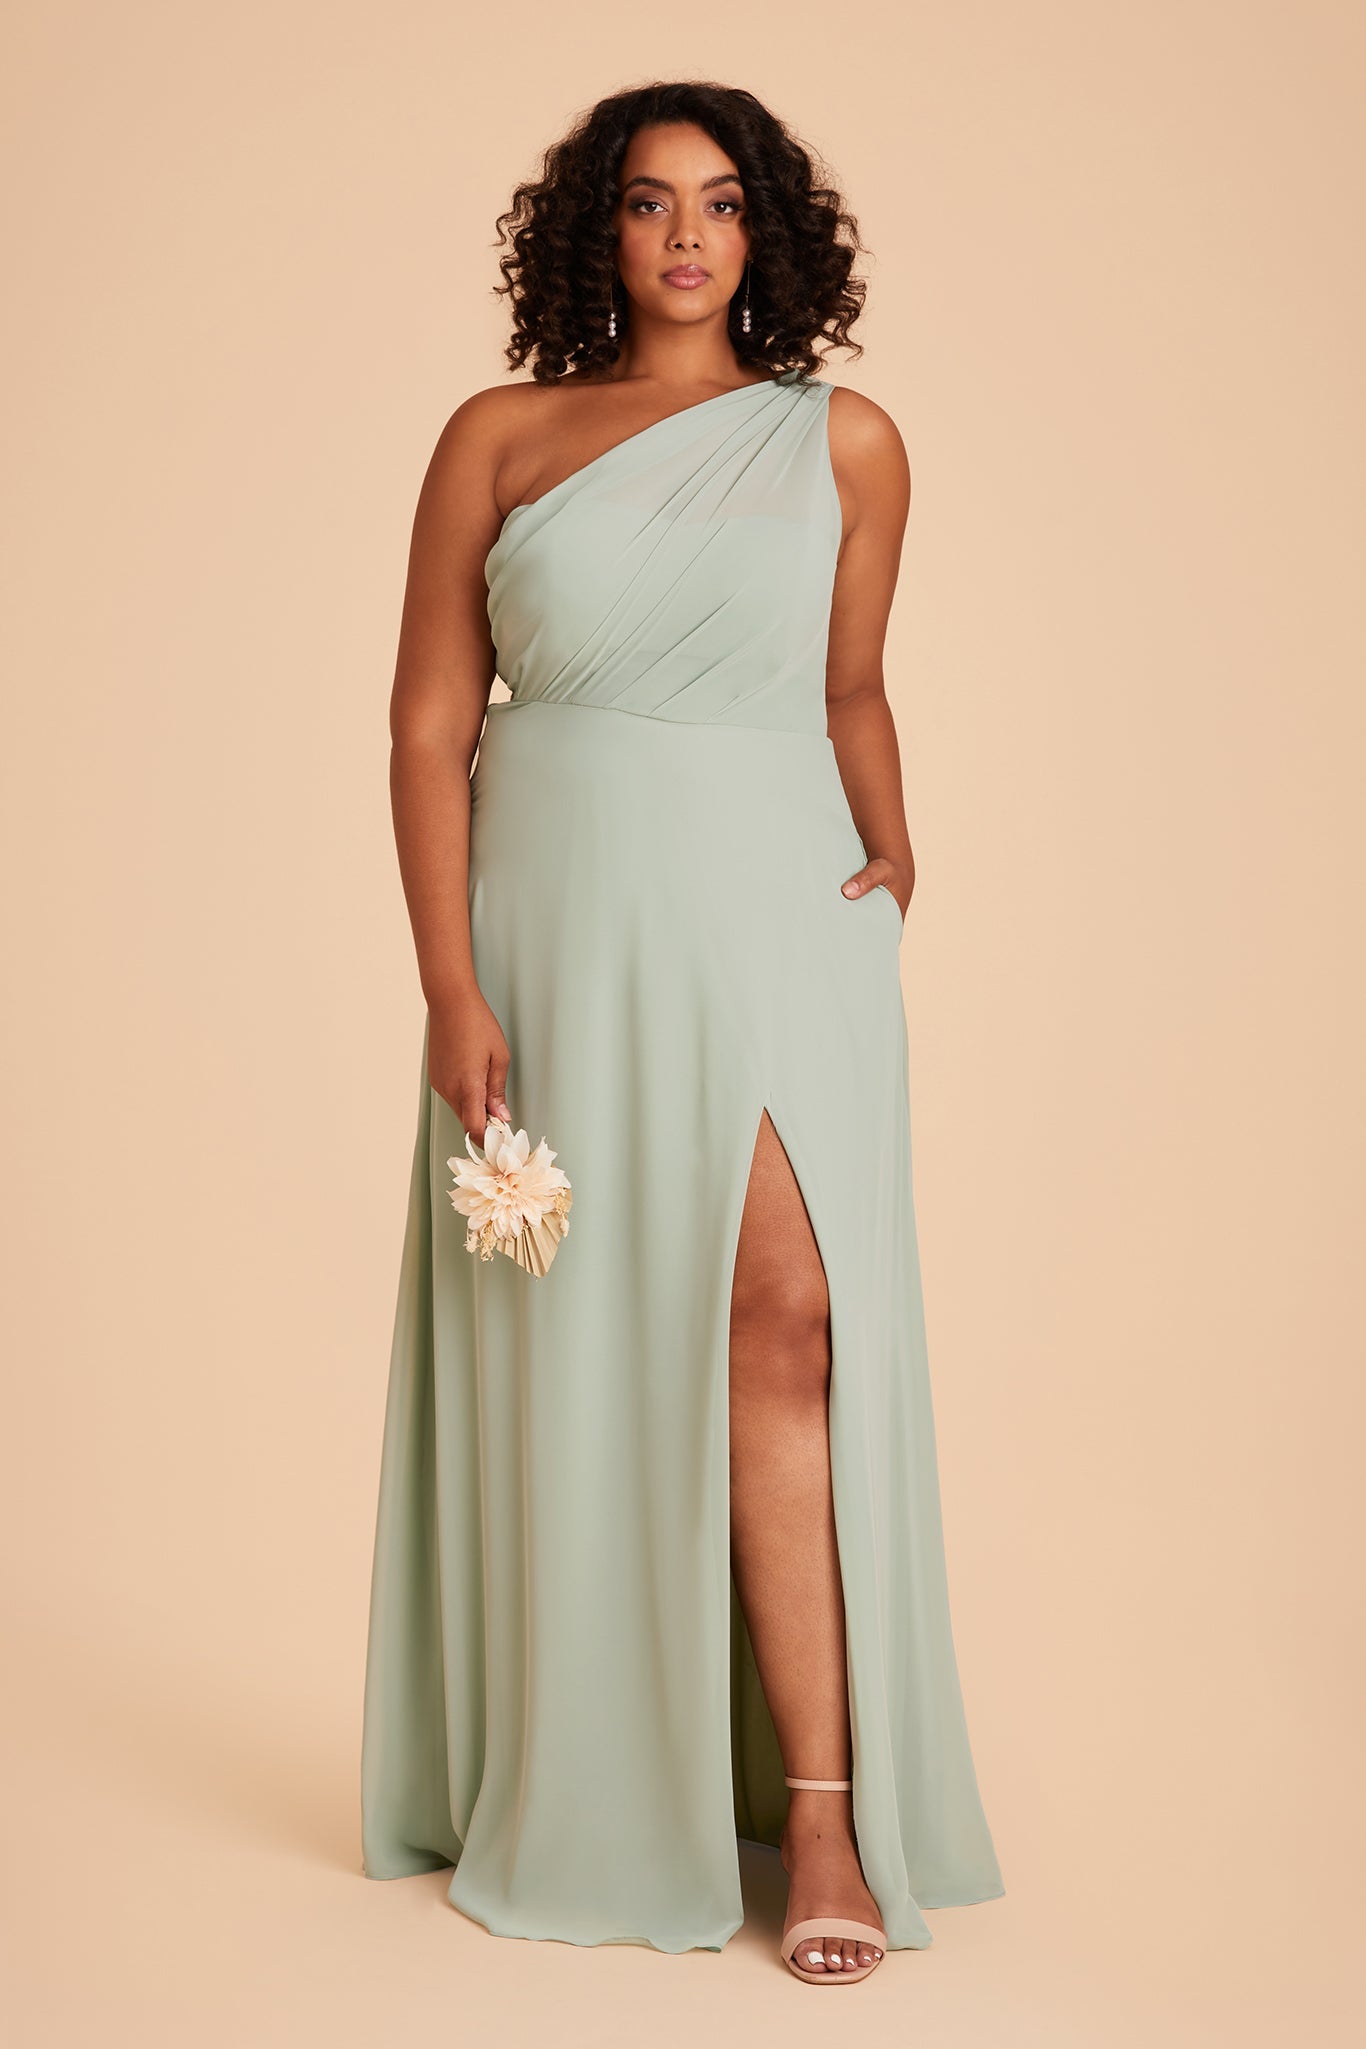 Front view of the Kira Dress Curve in sage chiffon with a slit shows the model with their left leg and foot revealed through a mid-thigh dress slit. They wear Natalie Chunky Heel shoes in nude blush.